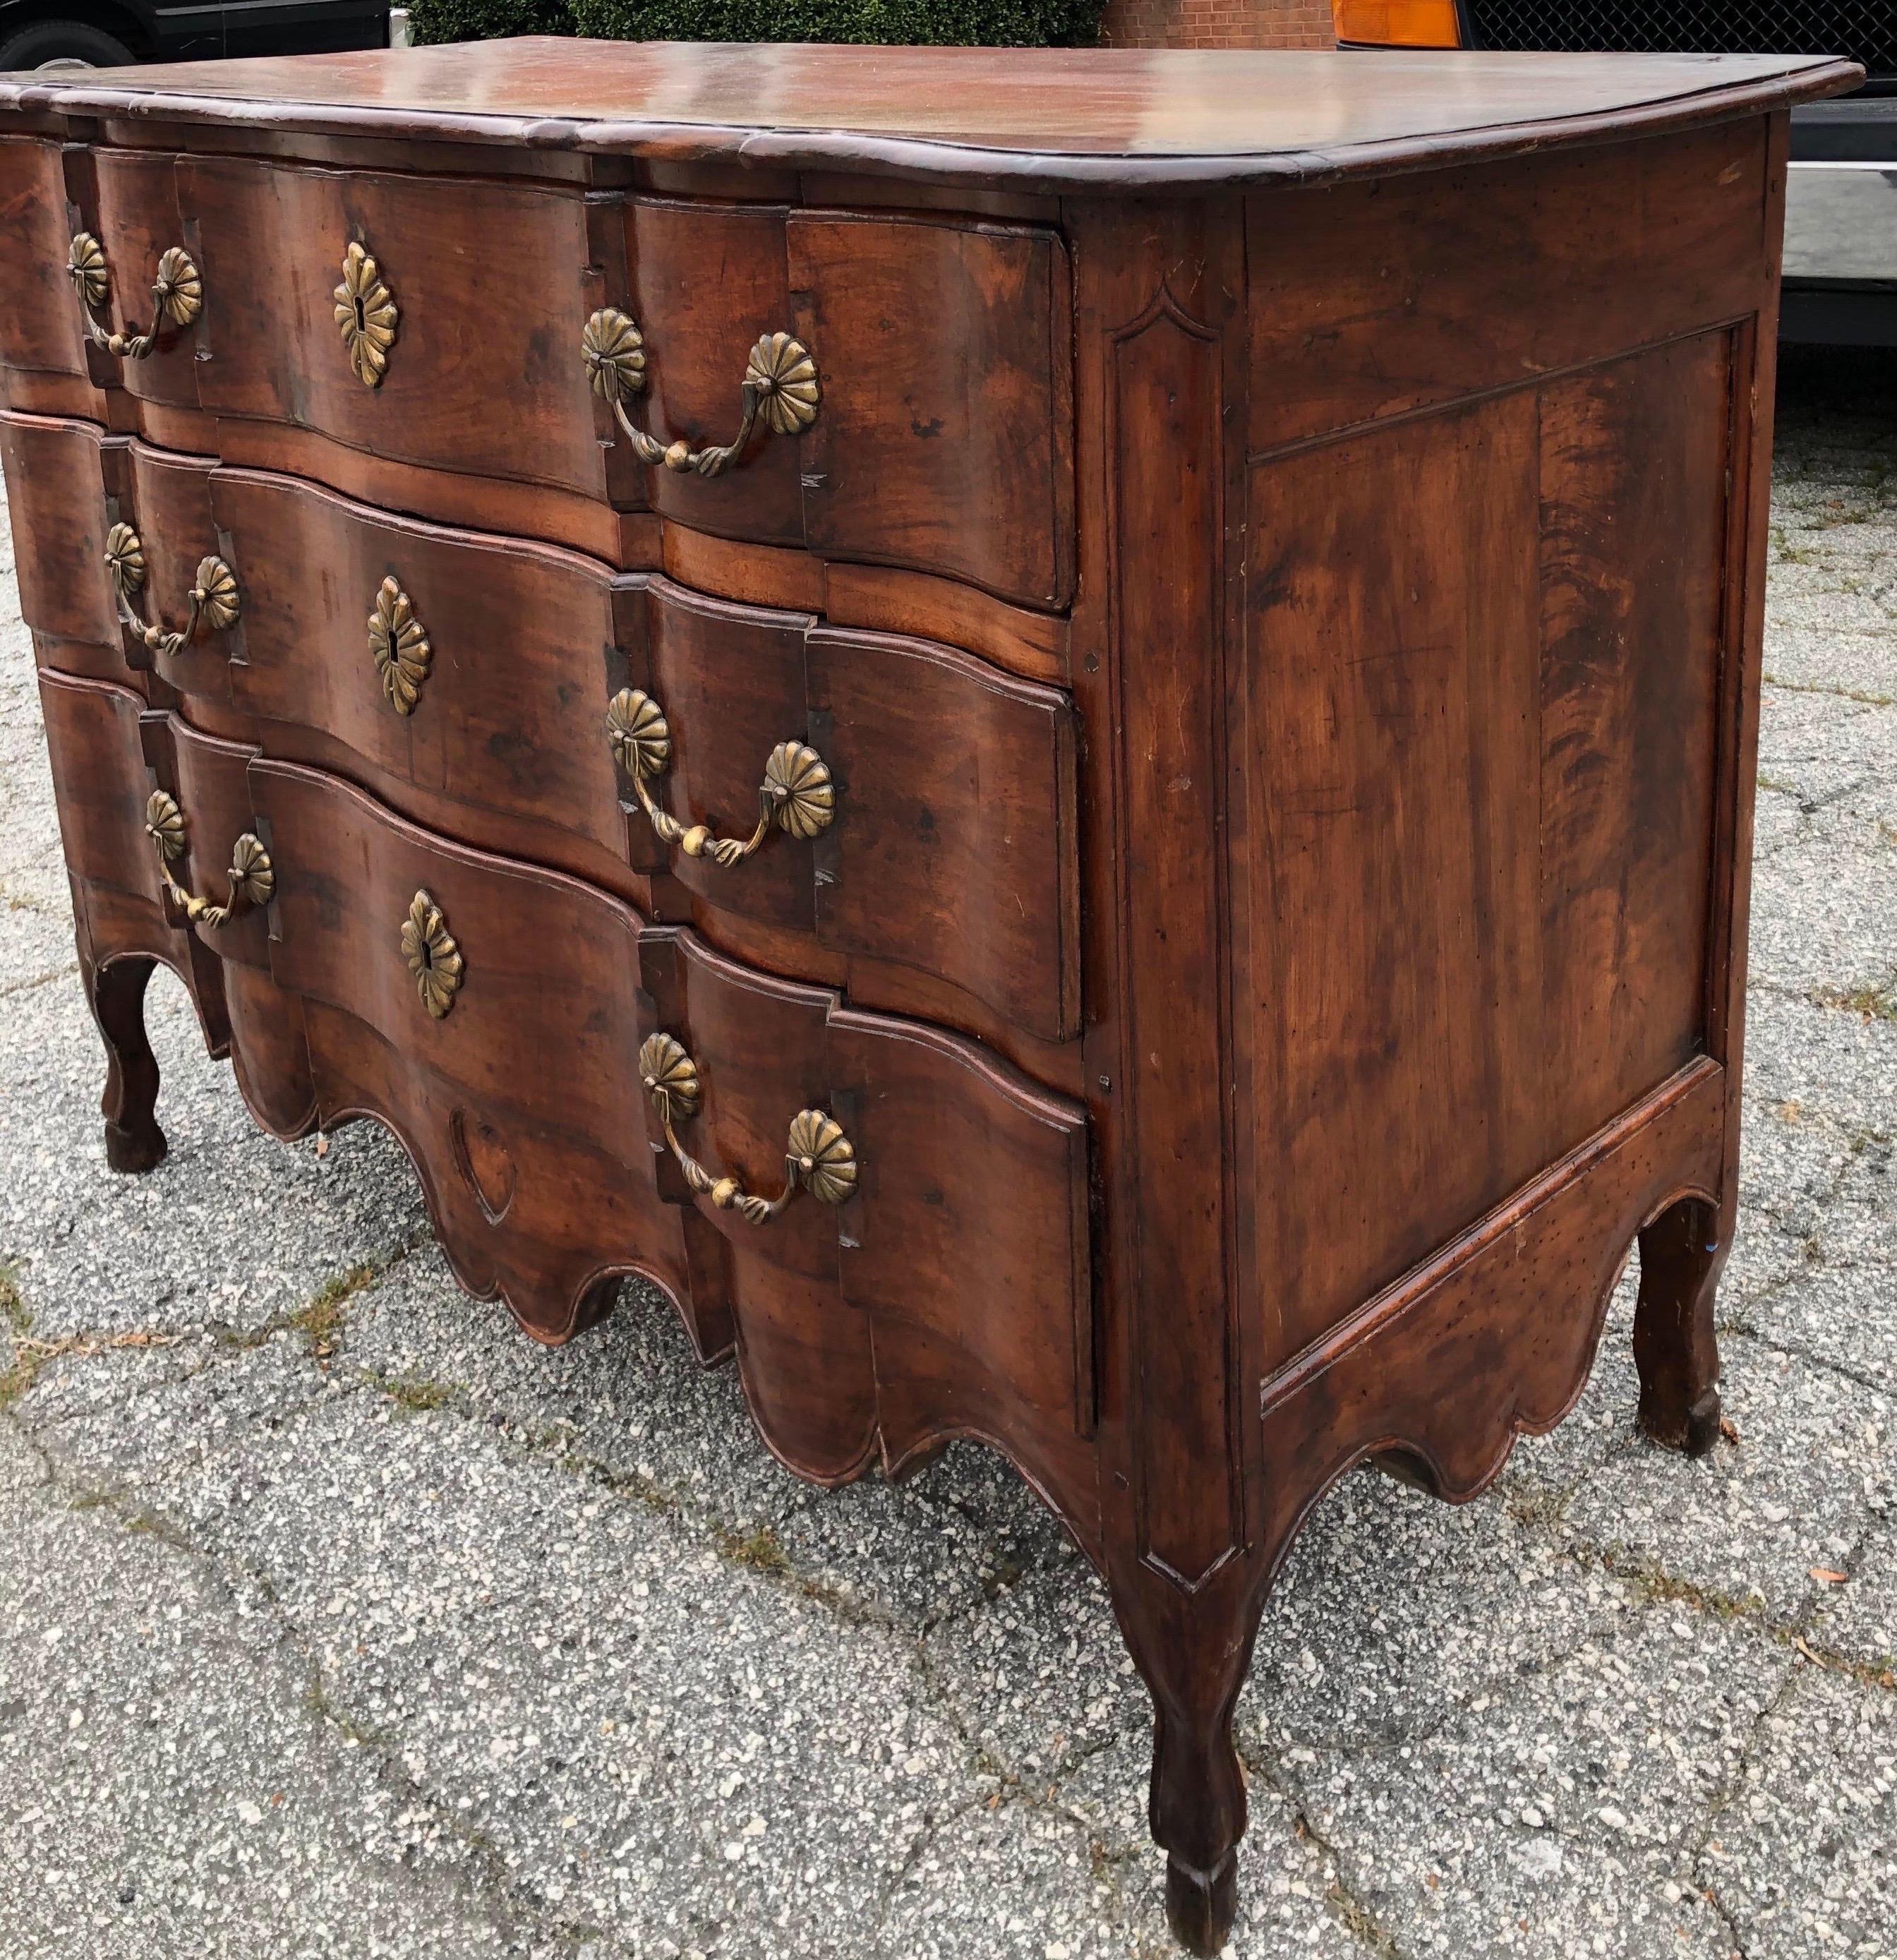 18th century French Provincial walnut 3-drawer commode with hoof feet, heart carved apron and shaped top. Gorgeous patina. Old charming repair to the front left corner of the top- see photos.